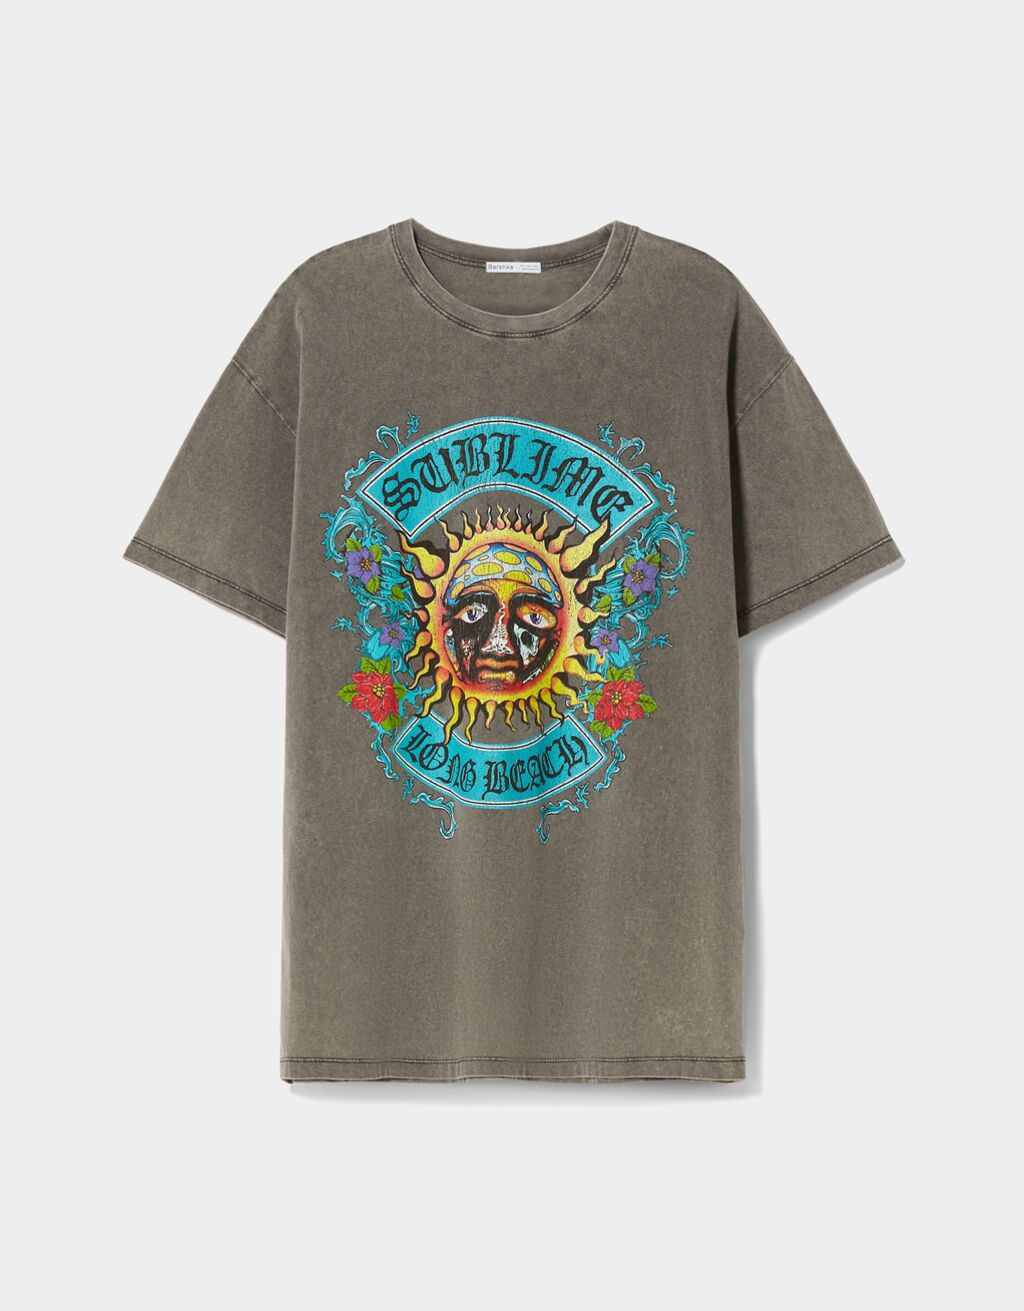 Short sleeve faded effect Sublime print T-shirt